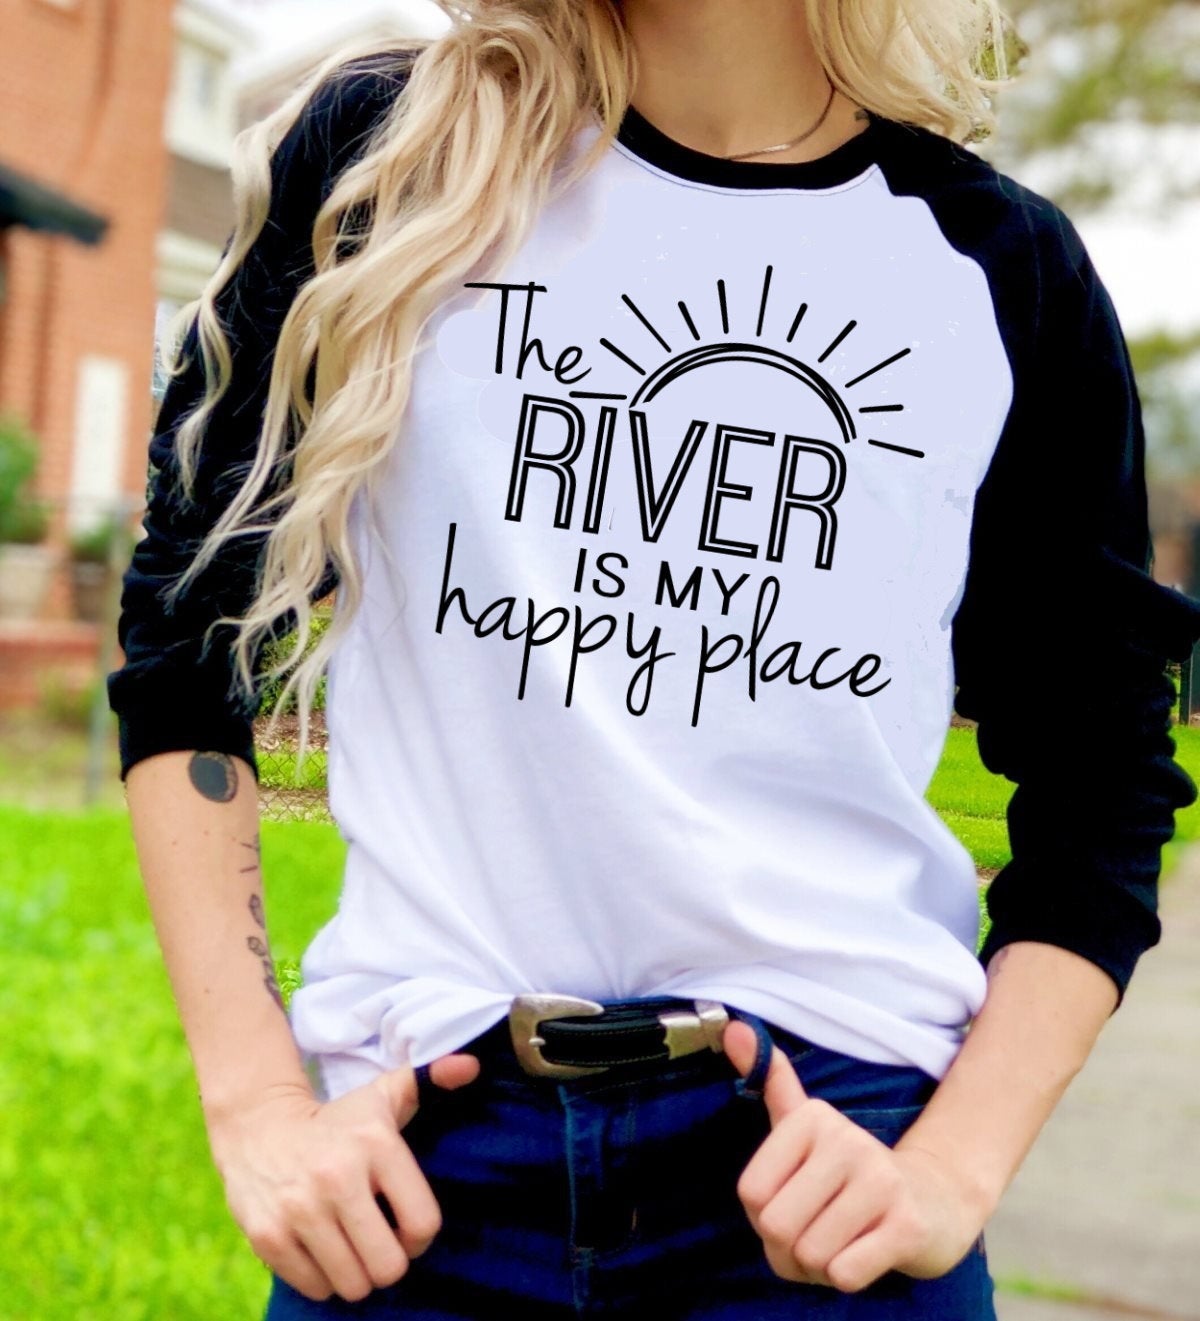 The River Is My Happy Place, Tubing, River Lover, Girls Weekend, Lake Is Happy Place Unisex Novelty T-Shirt Tee Raglan shirt